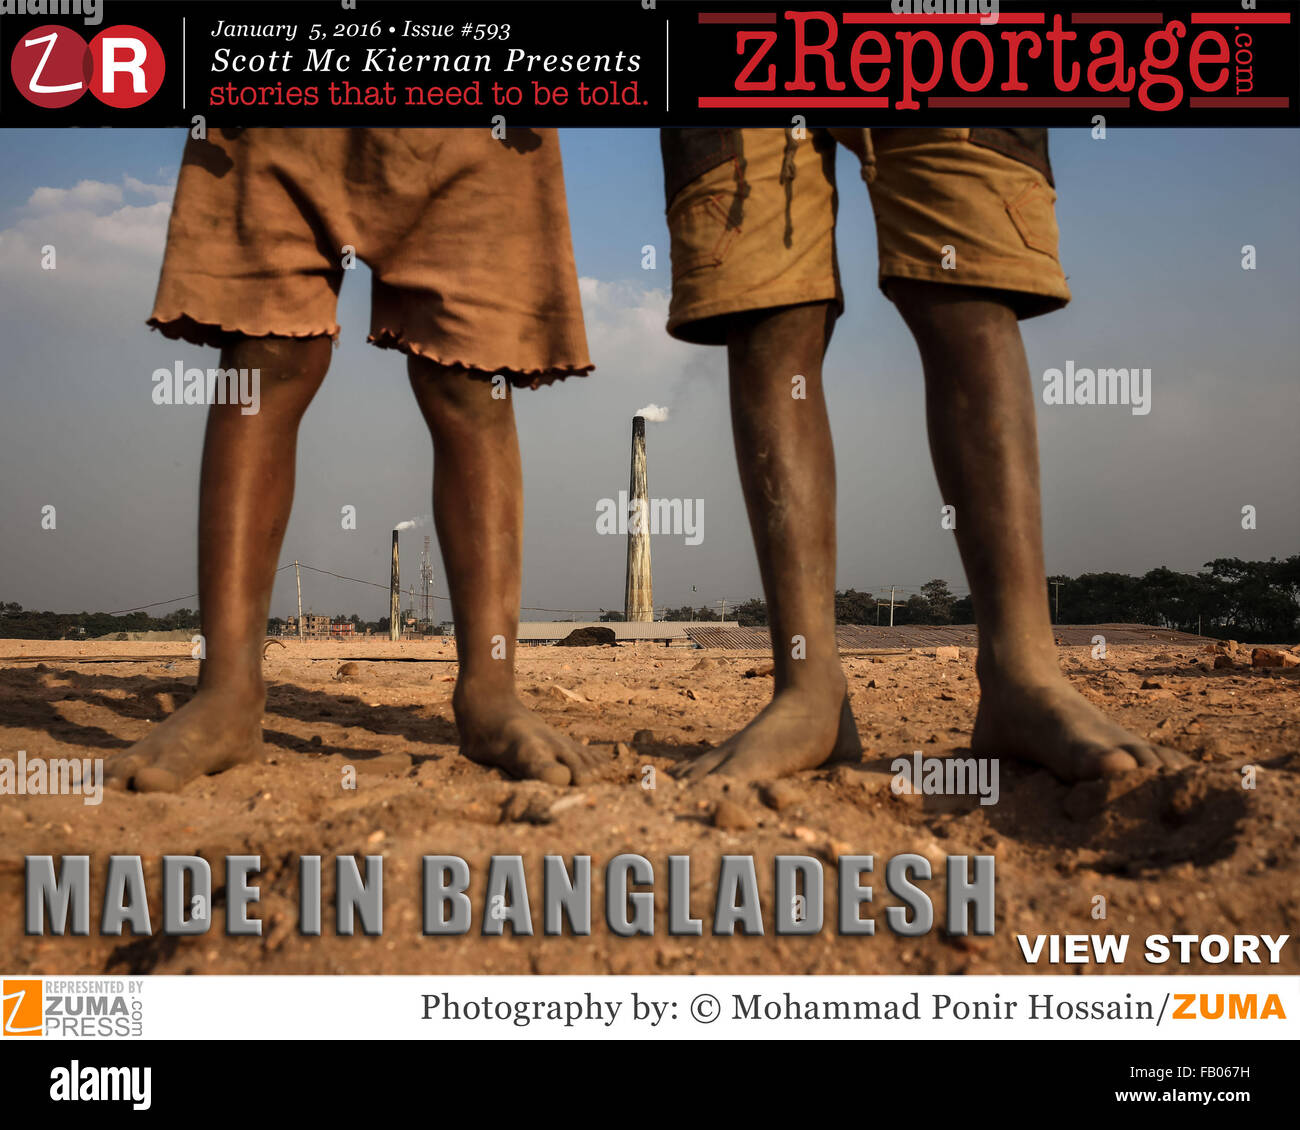 zReportage.com Story of the Week # 593 - Made In Bangladesh - Launched Jan. 5, 2016 - Full multimedia experience: audio, stills, text and or video: Go to zReportage.com to see more - Child labor still affects millions of kids worldwide. Statistics from the International Labor Organization show that there are about 73 million children between ages 10 and 14 that work in economic activities throughout the world, and 218 million children working worldwide between the ages of 5 and 17. These figures do not even include domestic labor. The child labor problem is worst in Asia, where 44.6 million Stock Photo